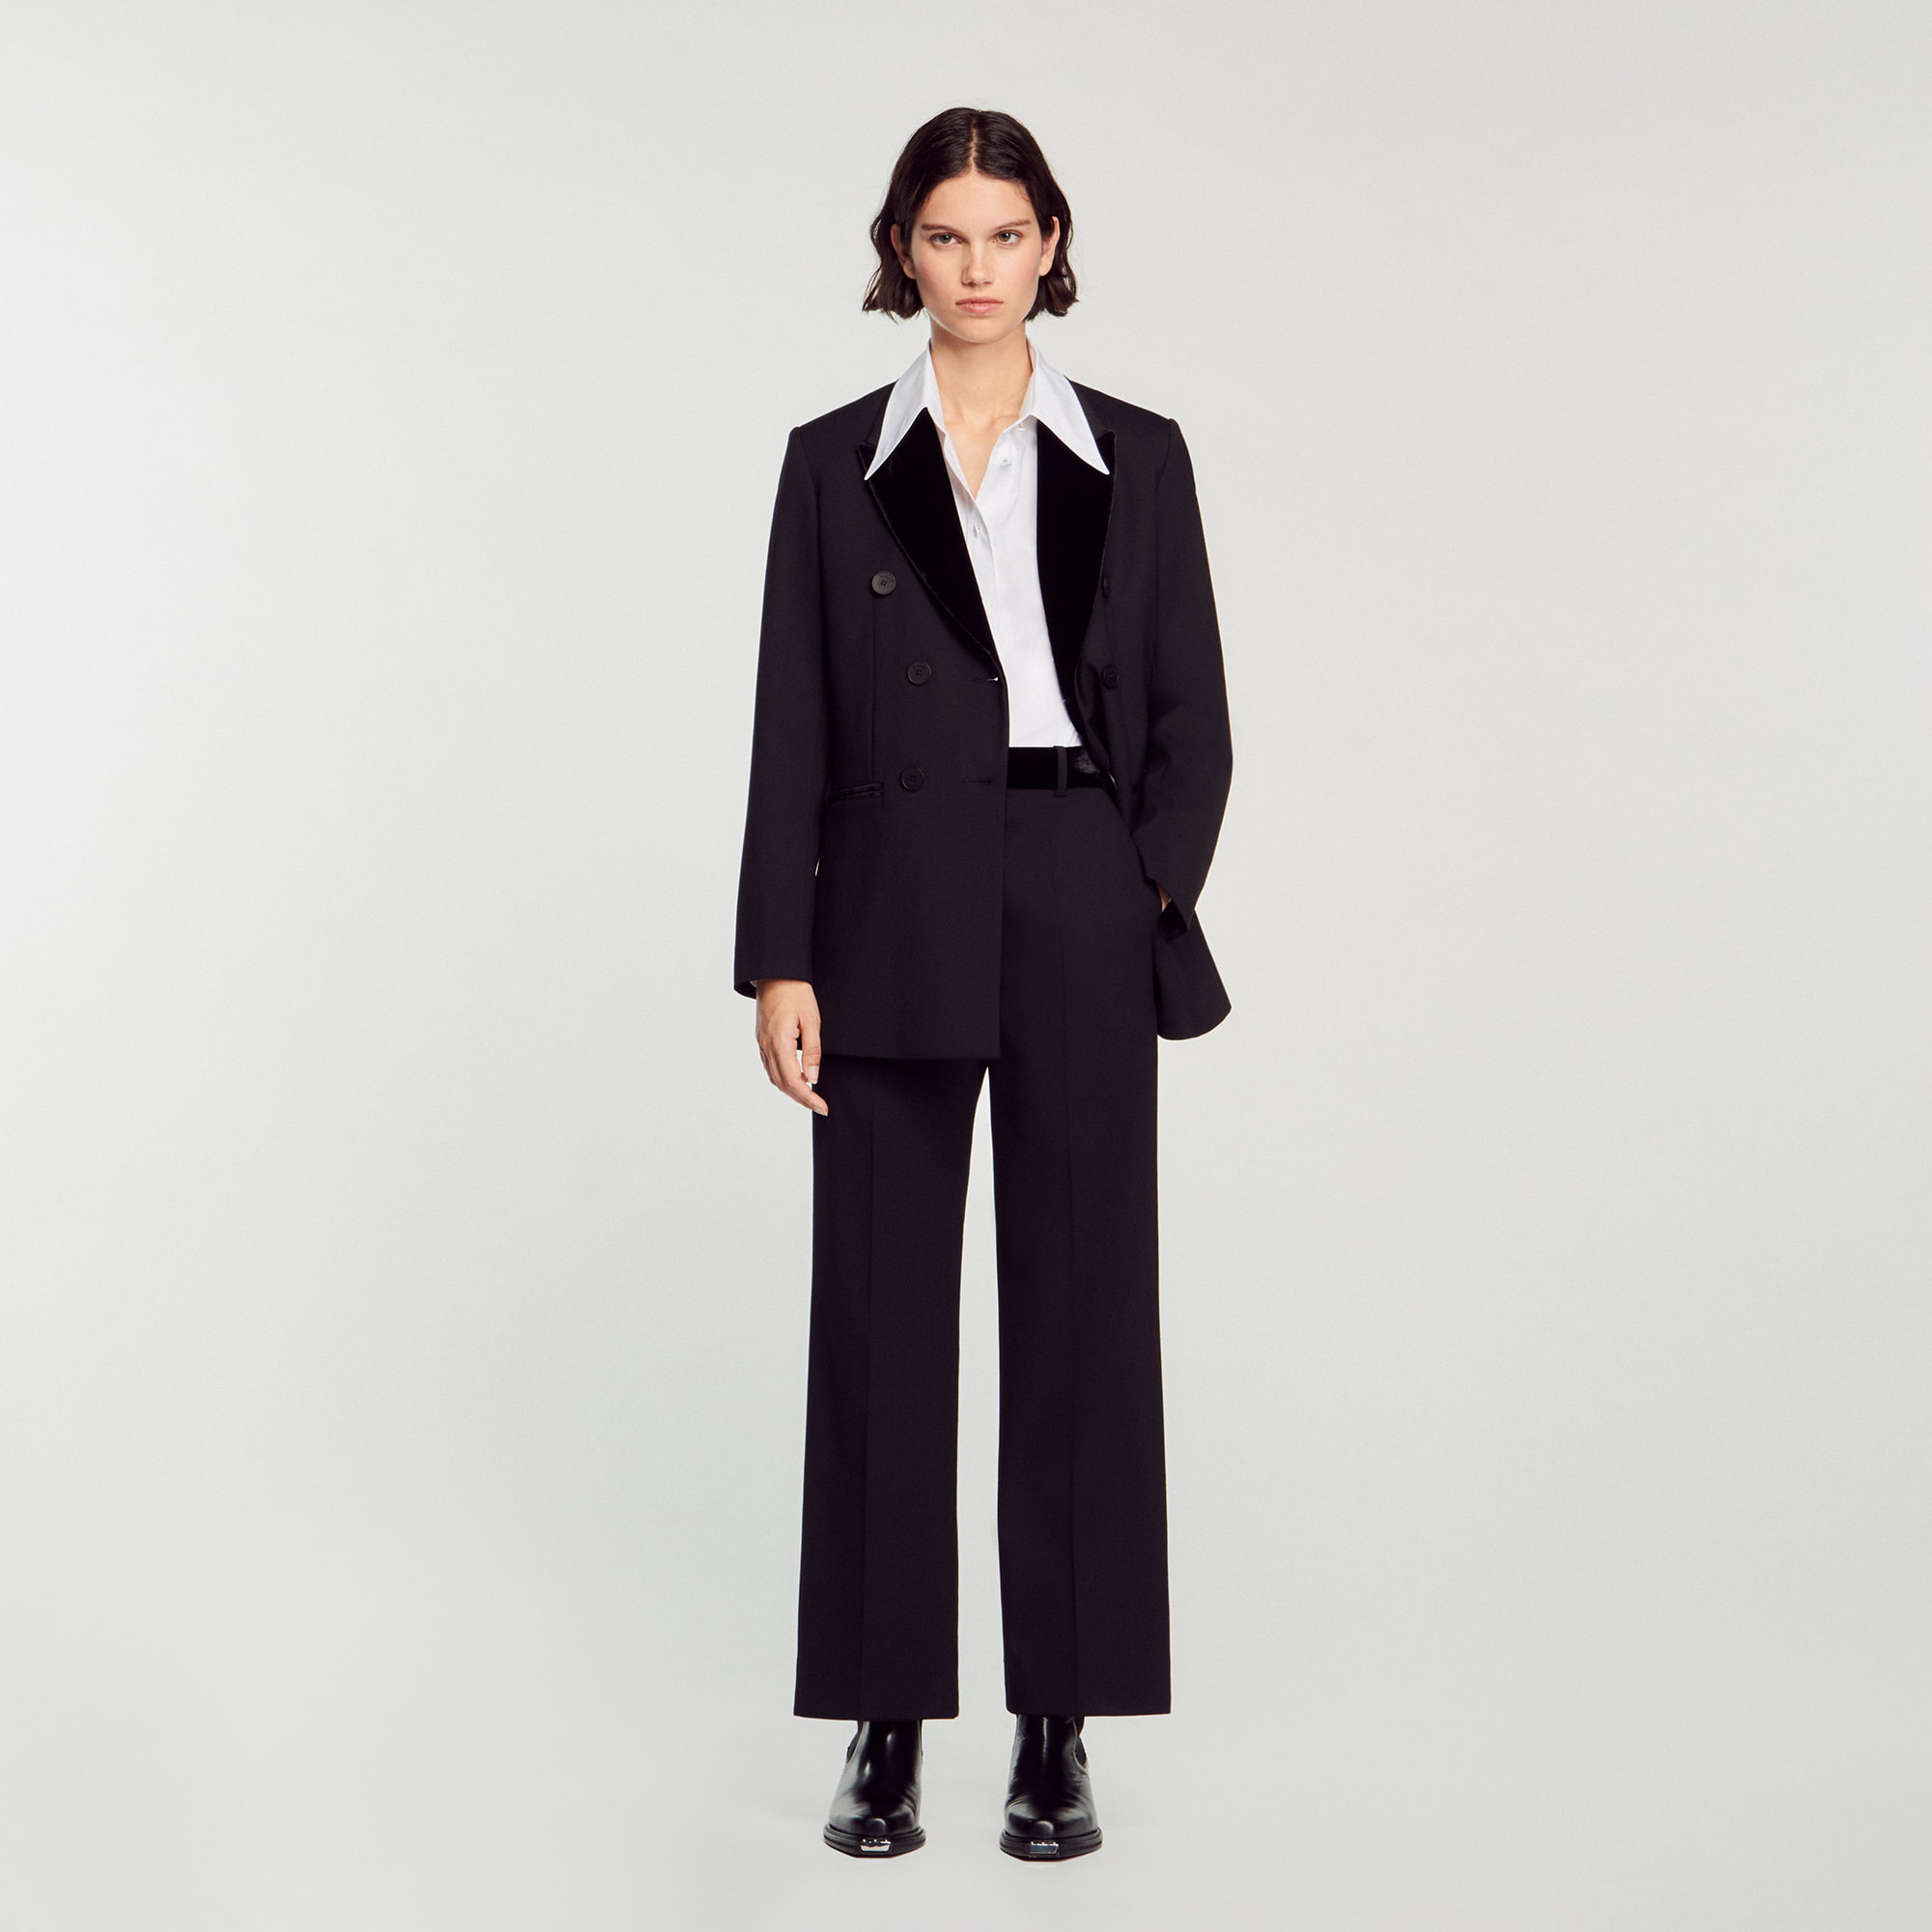 Sandro polyester Straight-leg pants with a contrasting velvet waist, slanted pockets, and piped pockets on the back